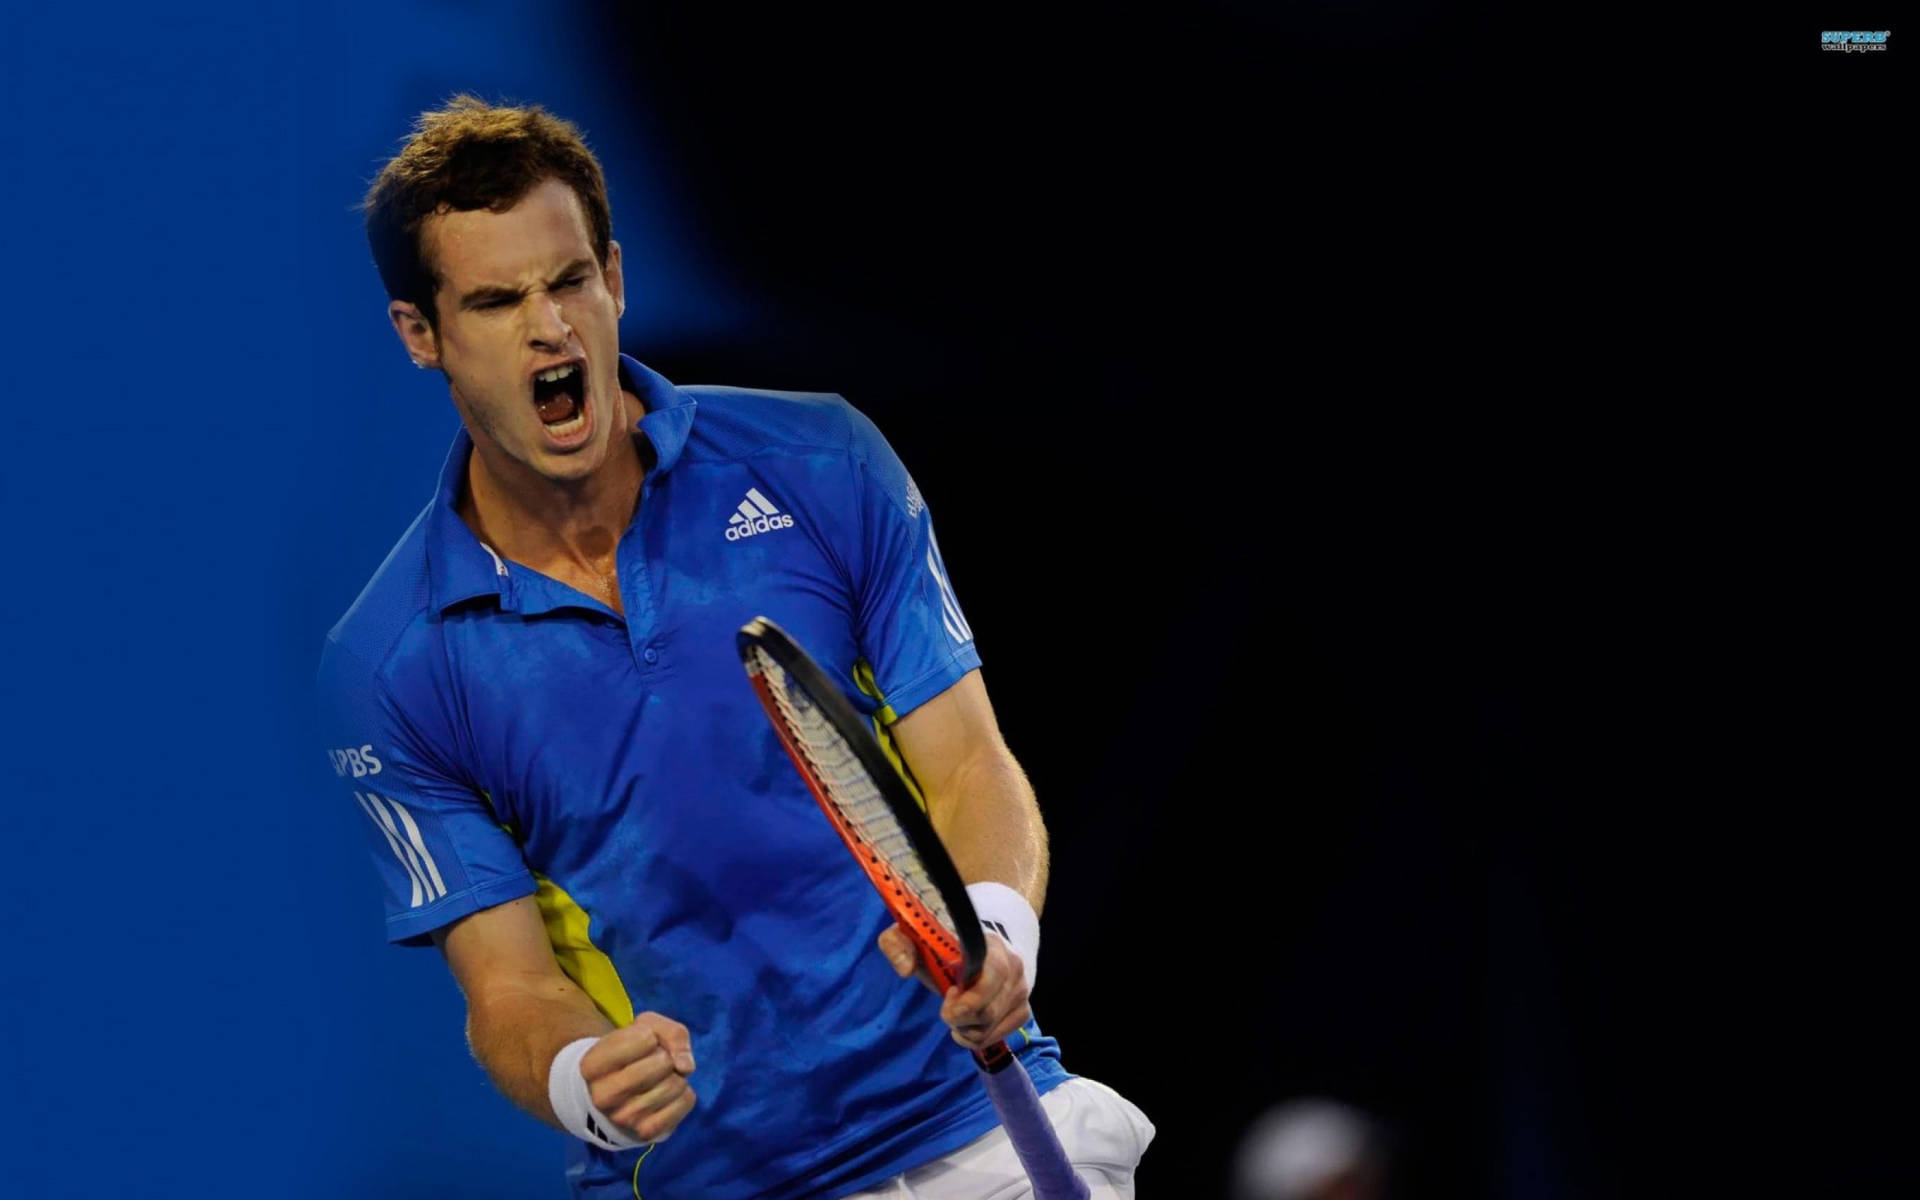 Andy Murray On The Move In A Challenging Tennis Match.